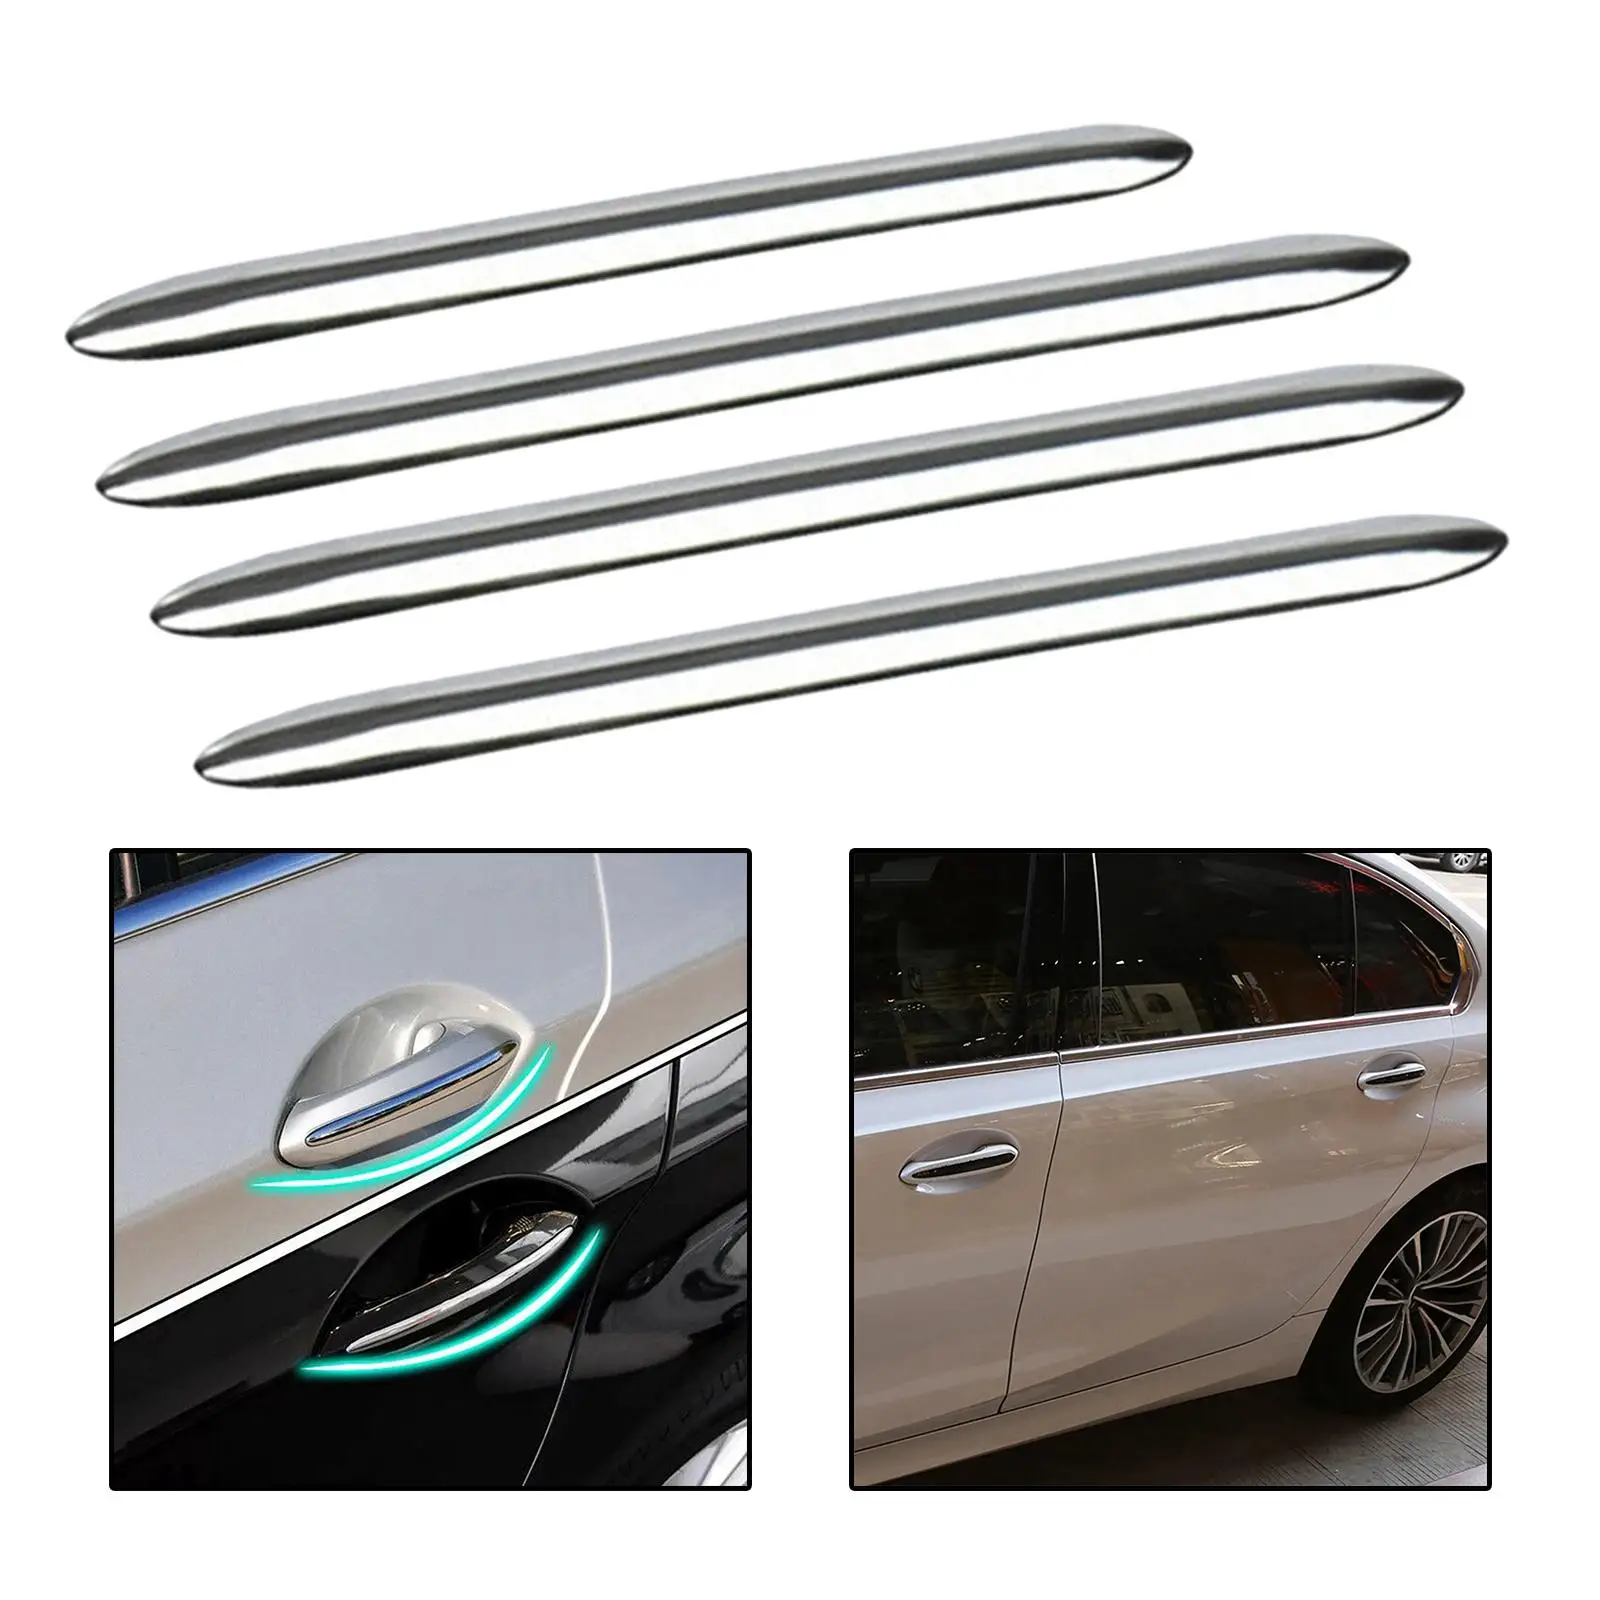 4x Car Exterior Door Handle Cover Trim Replace for BMW 5 F10 F18